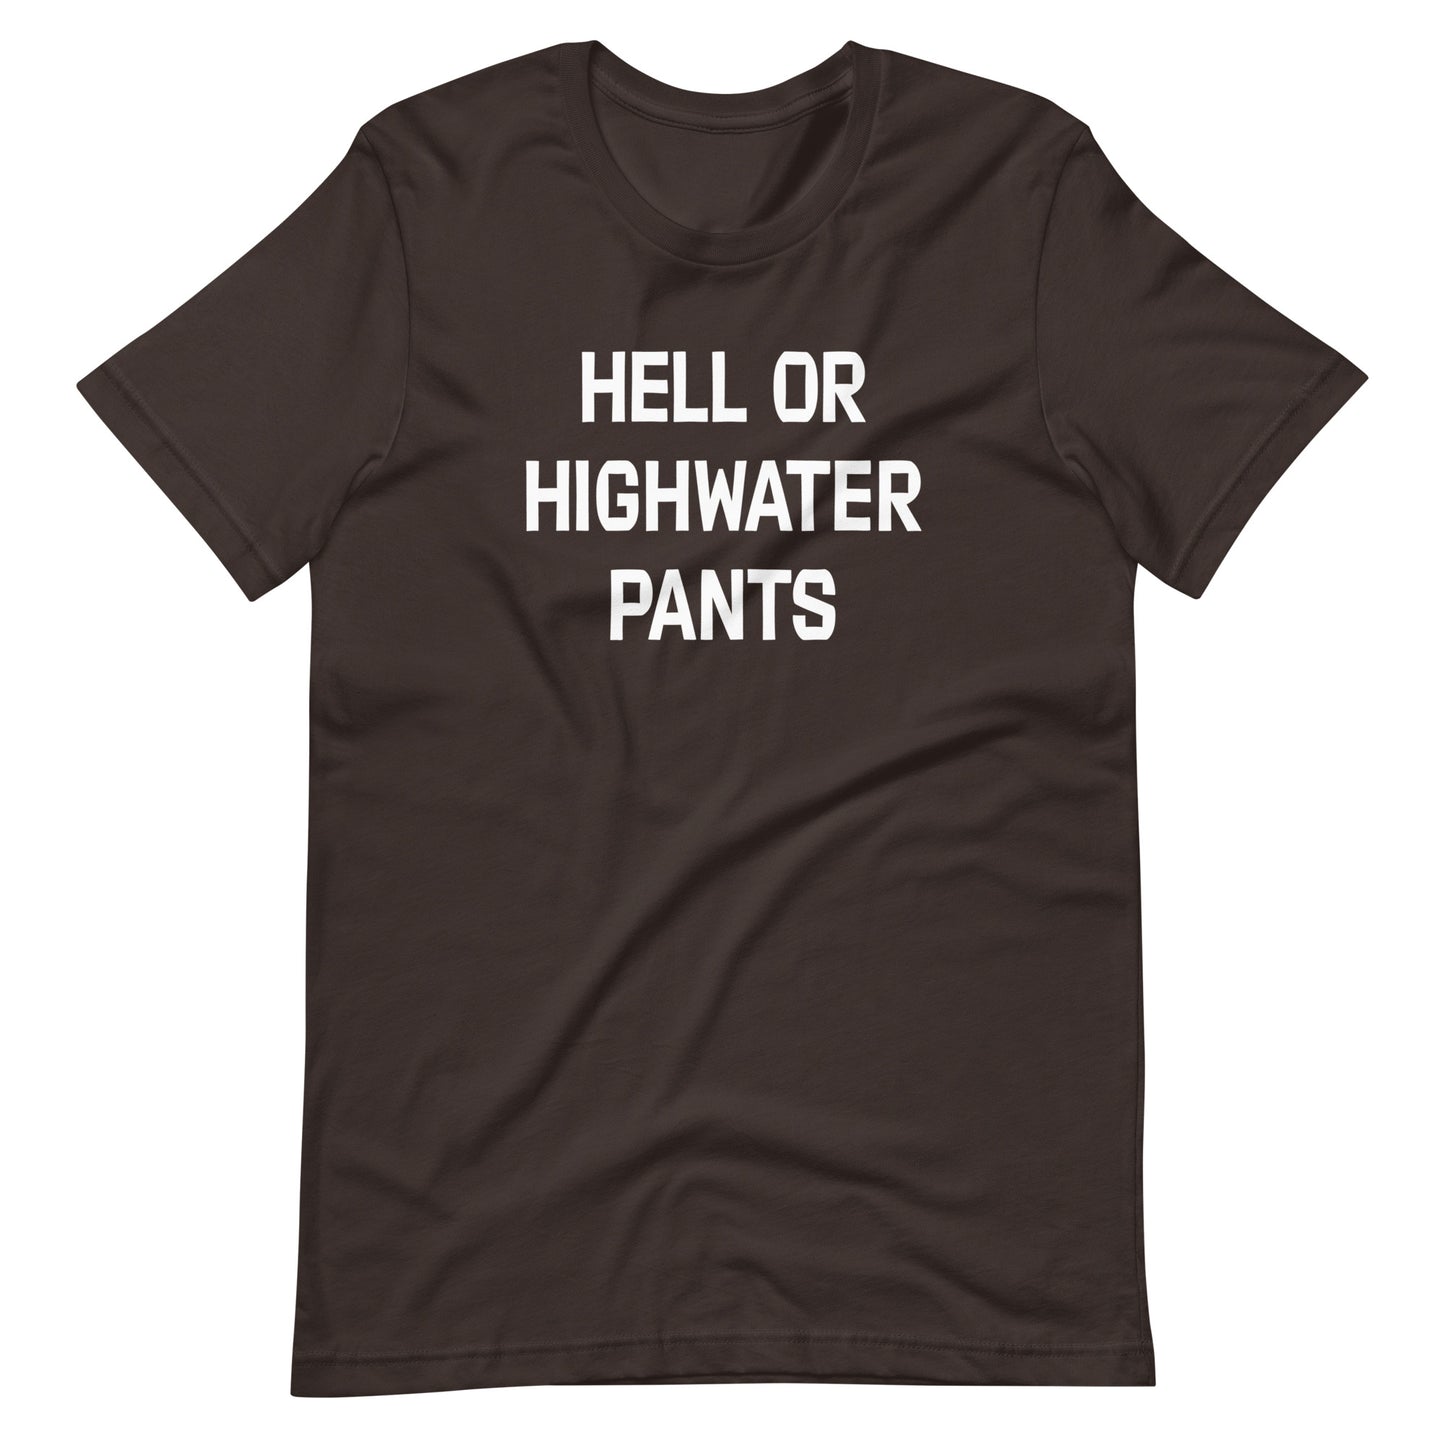 Hell or Highwater Pants Unisex t-shirt (multiple color options)